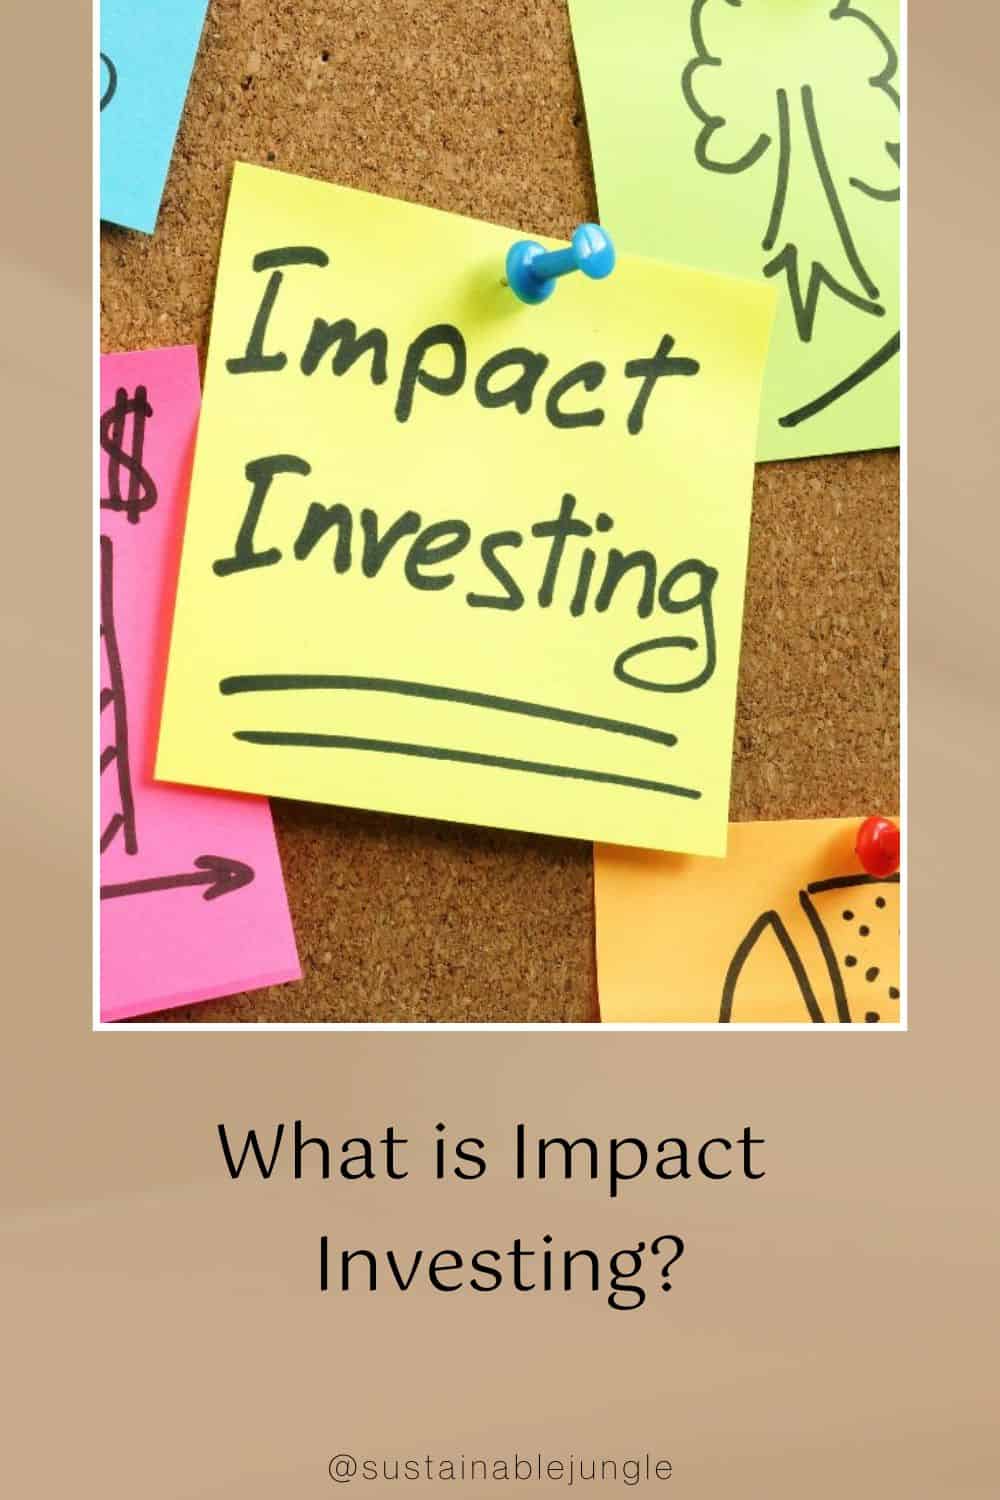 What is Impact Investing? Image by designer491 via Getty Images on Canva Pro #whatisimpactinvesting #howtostartimpactinvesting #socialimpactinvesting #whatissociallyresponsibleinvesting #esgsociallyresponsibleinvesting #sustainablejungle